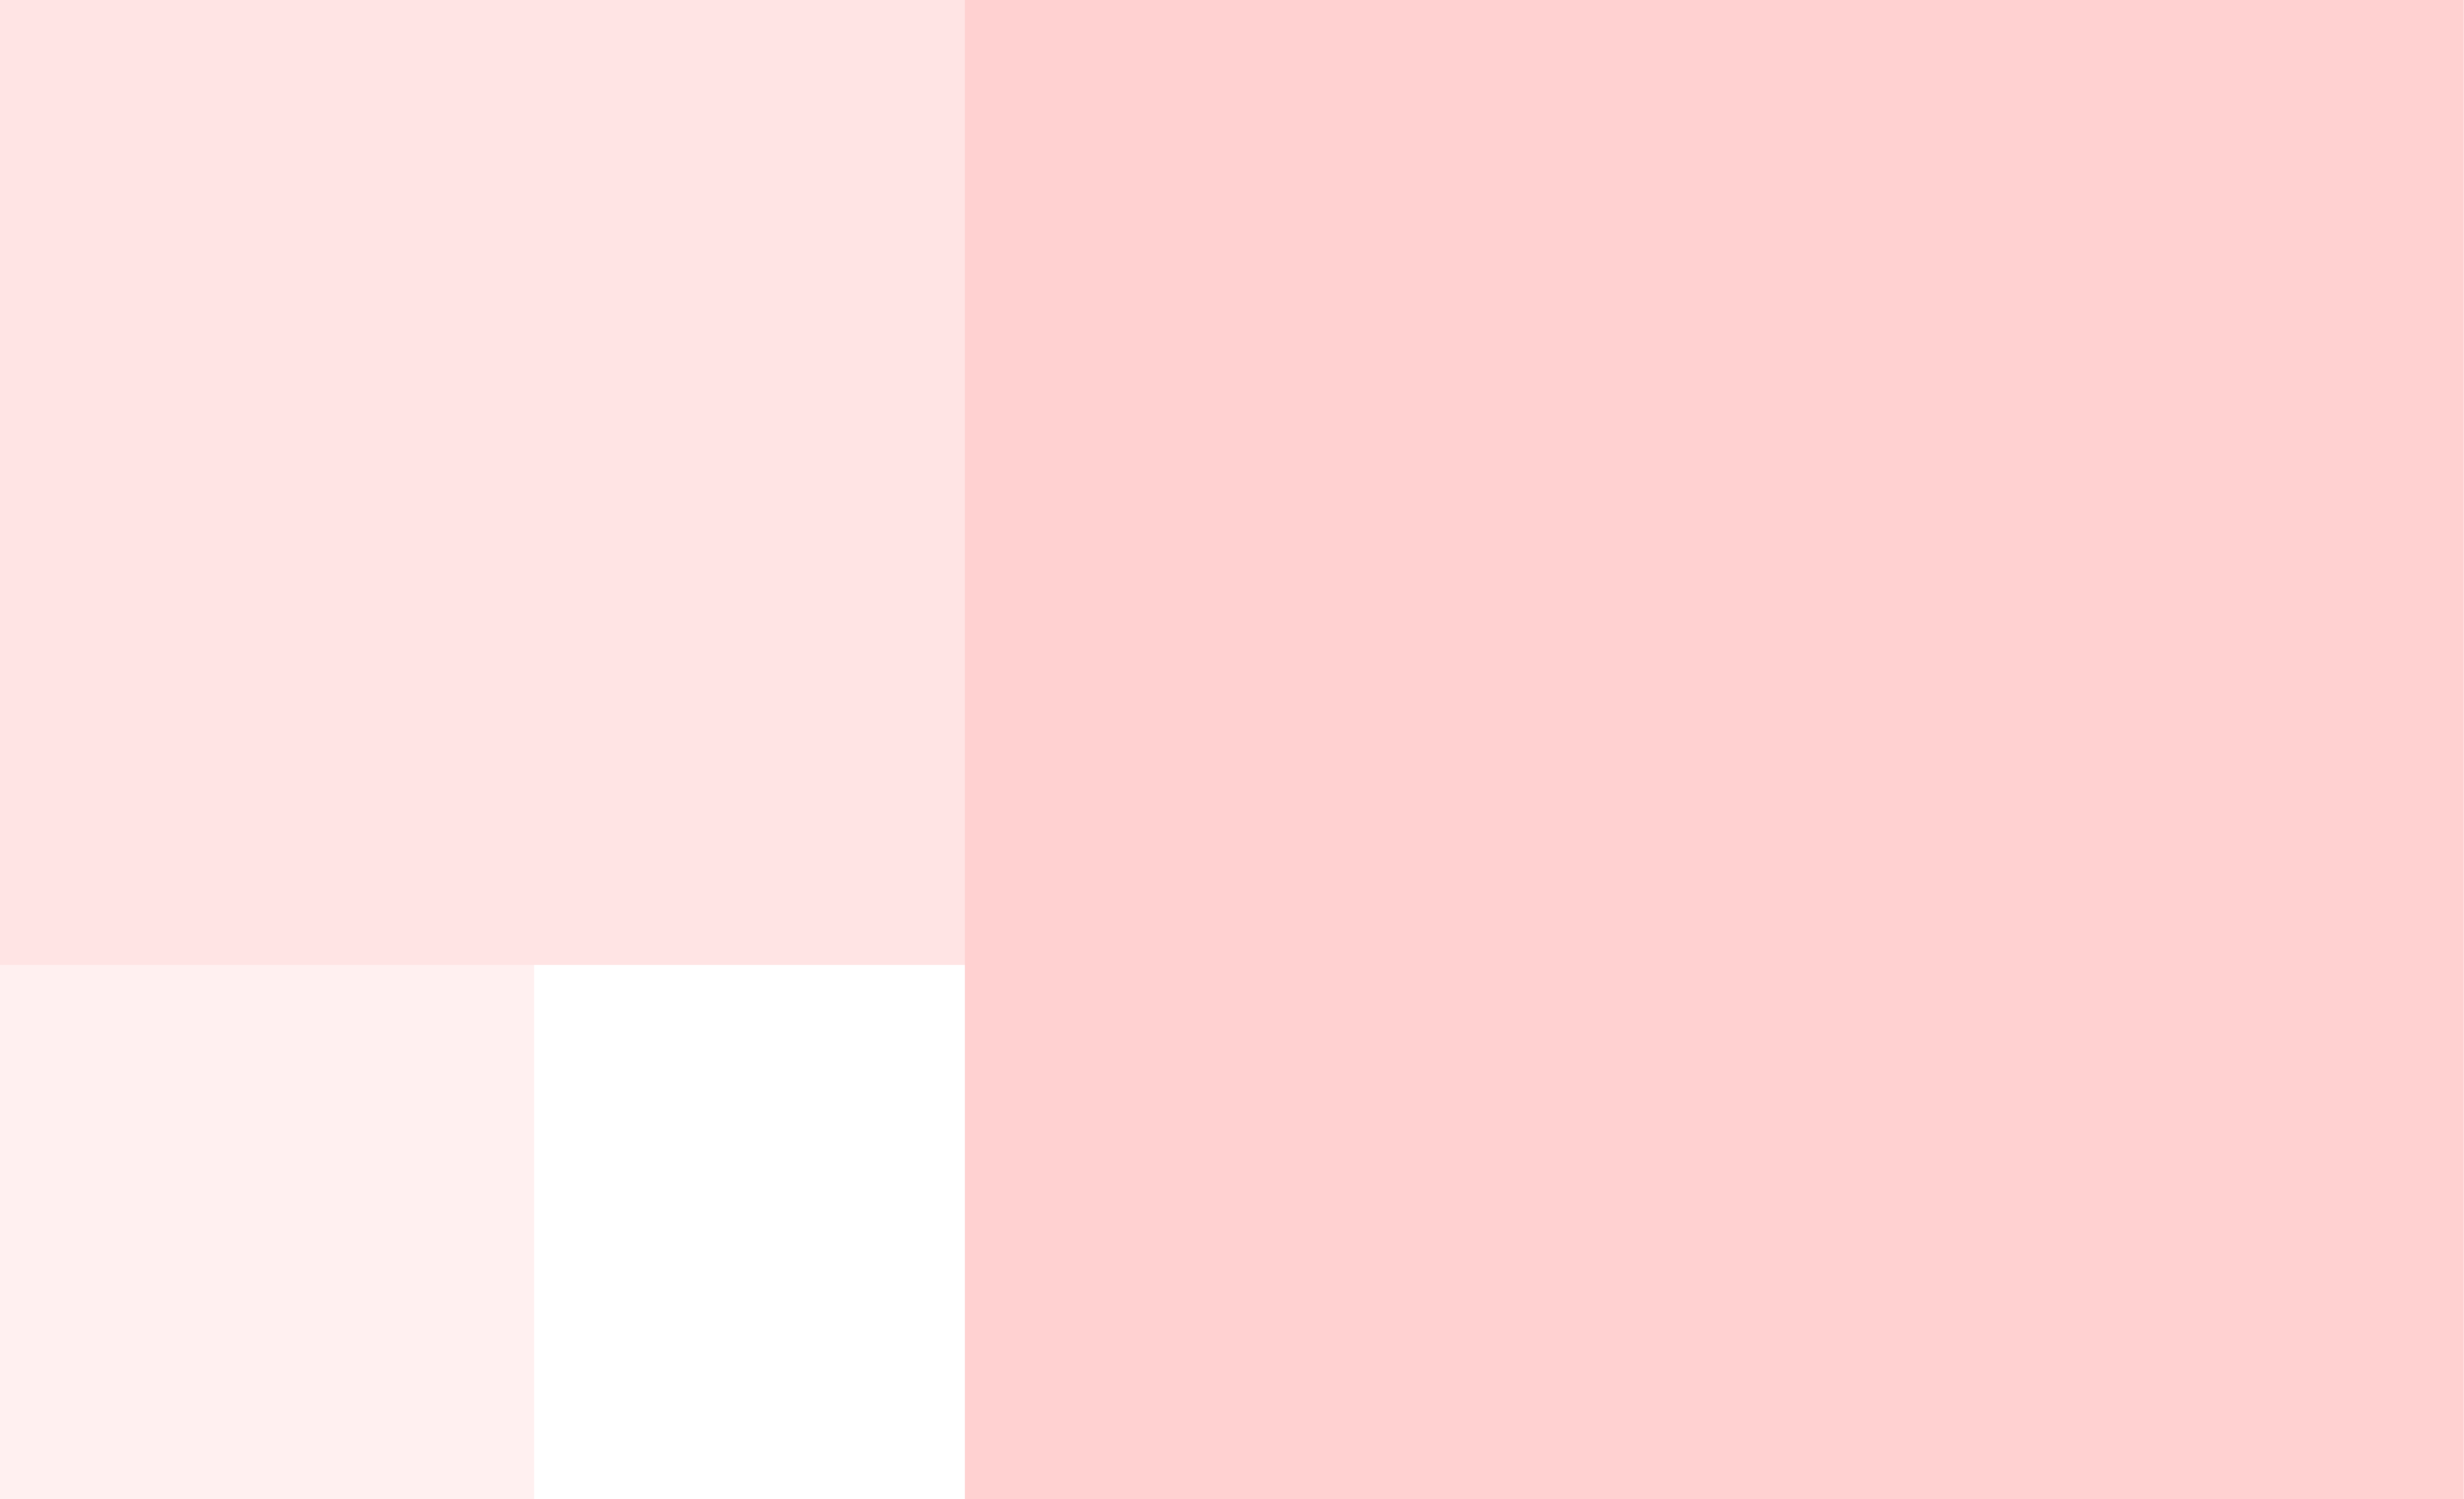 Pink squared shapes combination